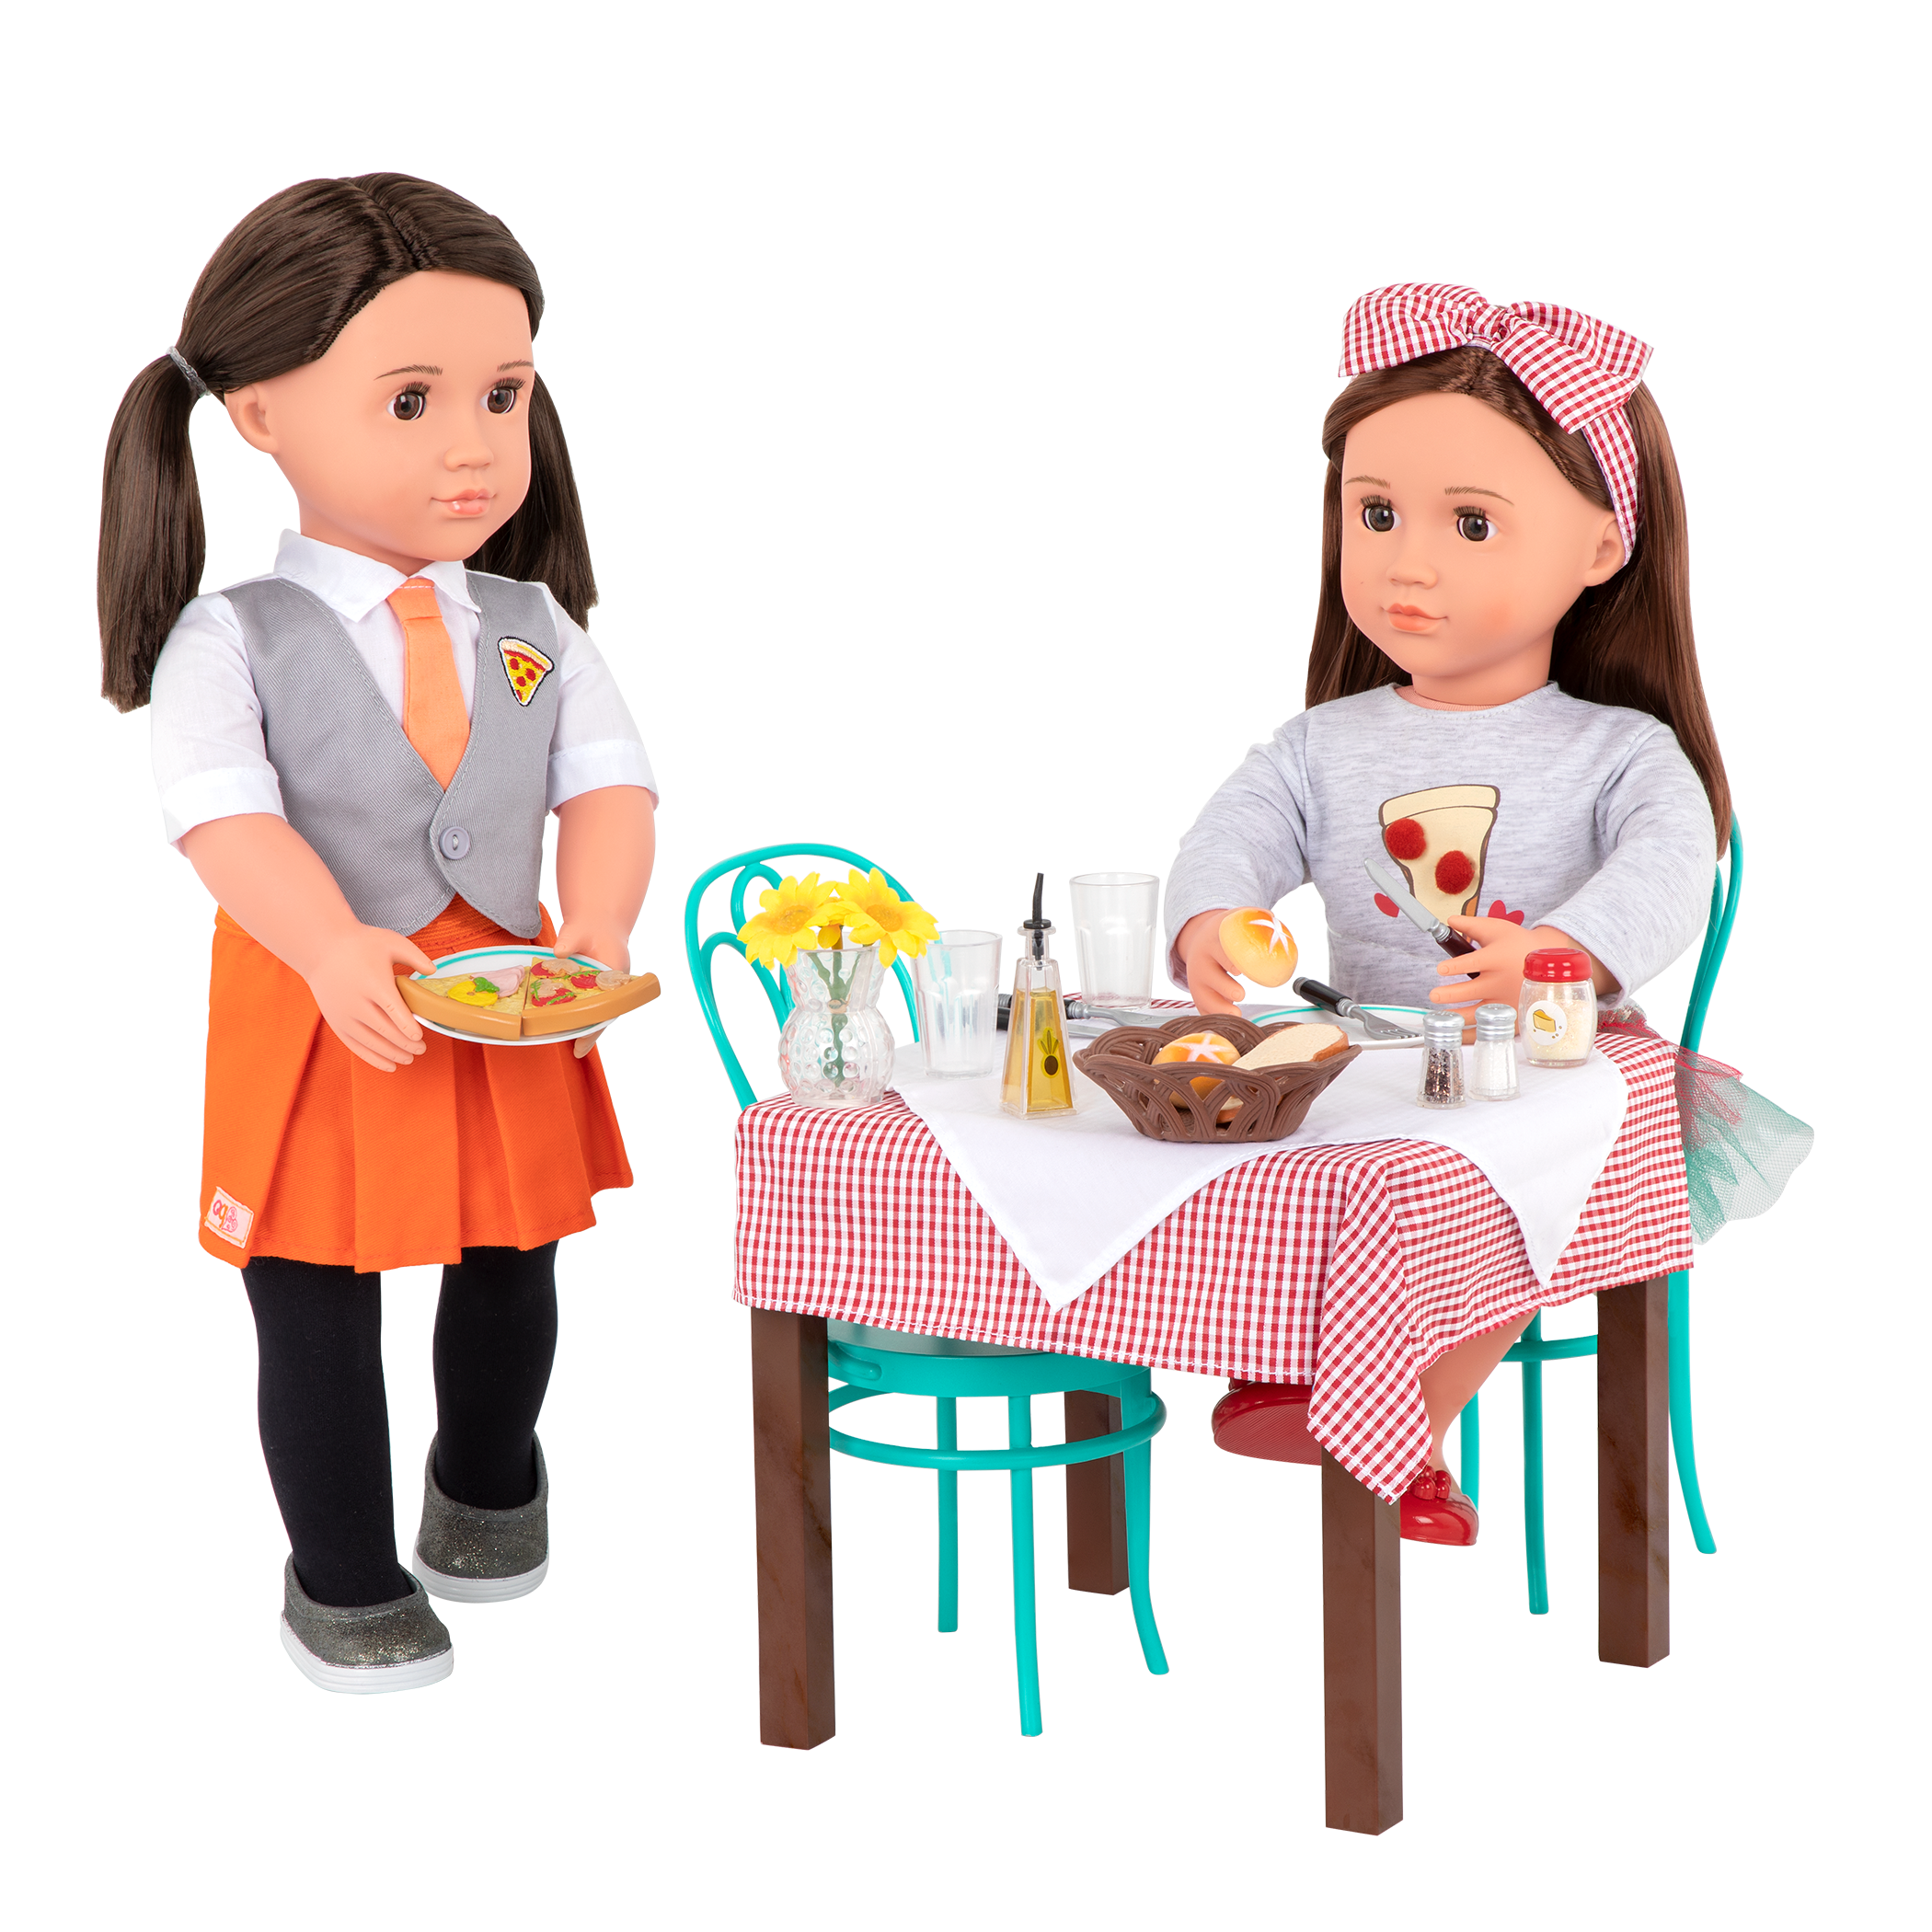 Two 18-inch dolls using pizzeria dining playset